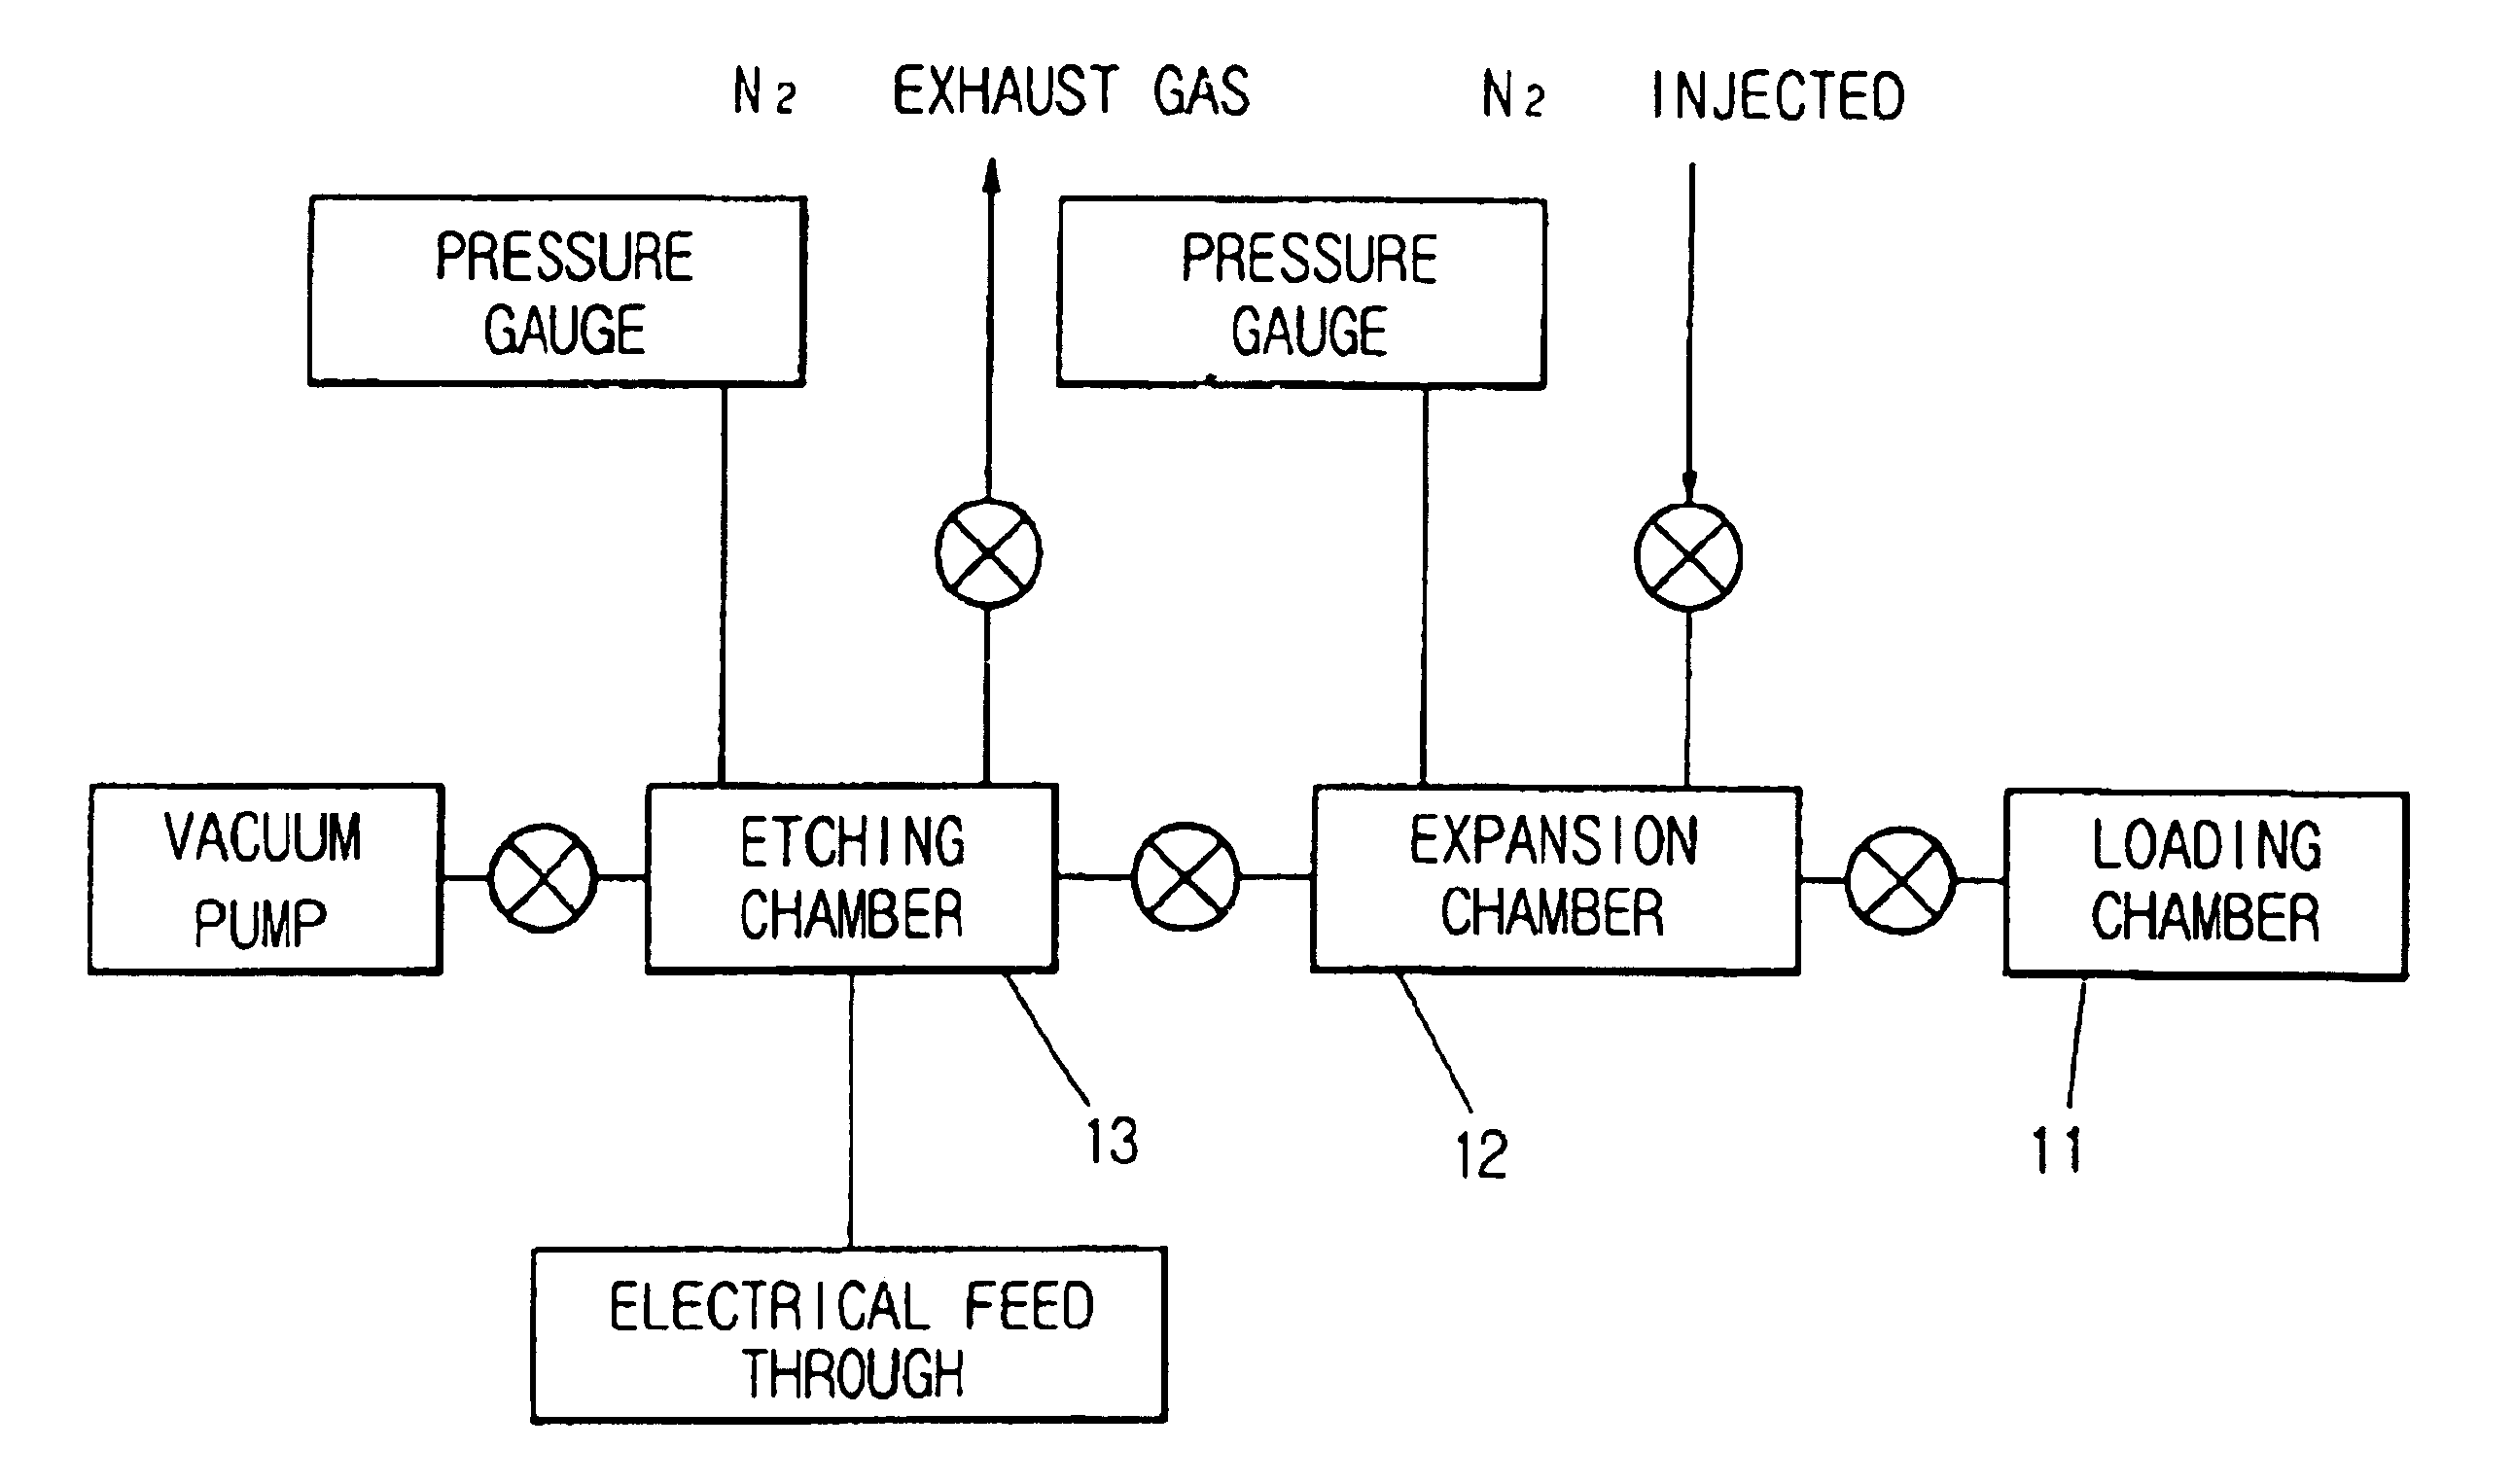 Silicon etching apparatus using XeF2